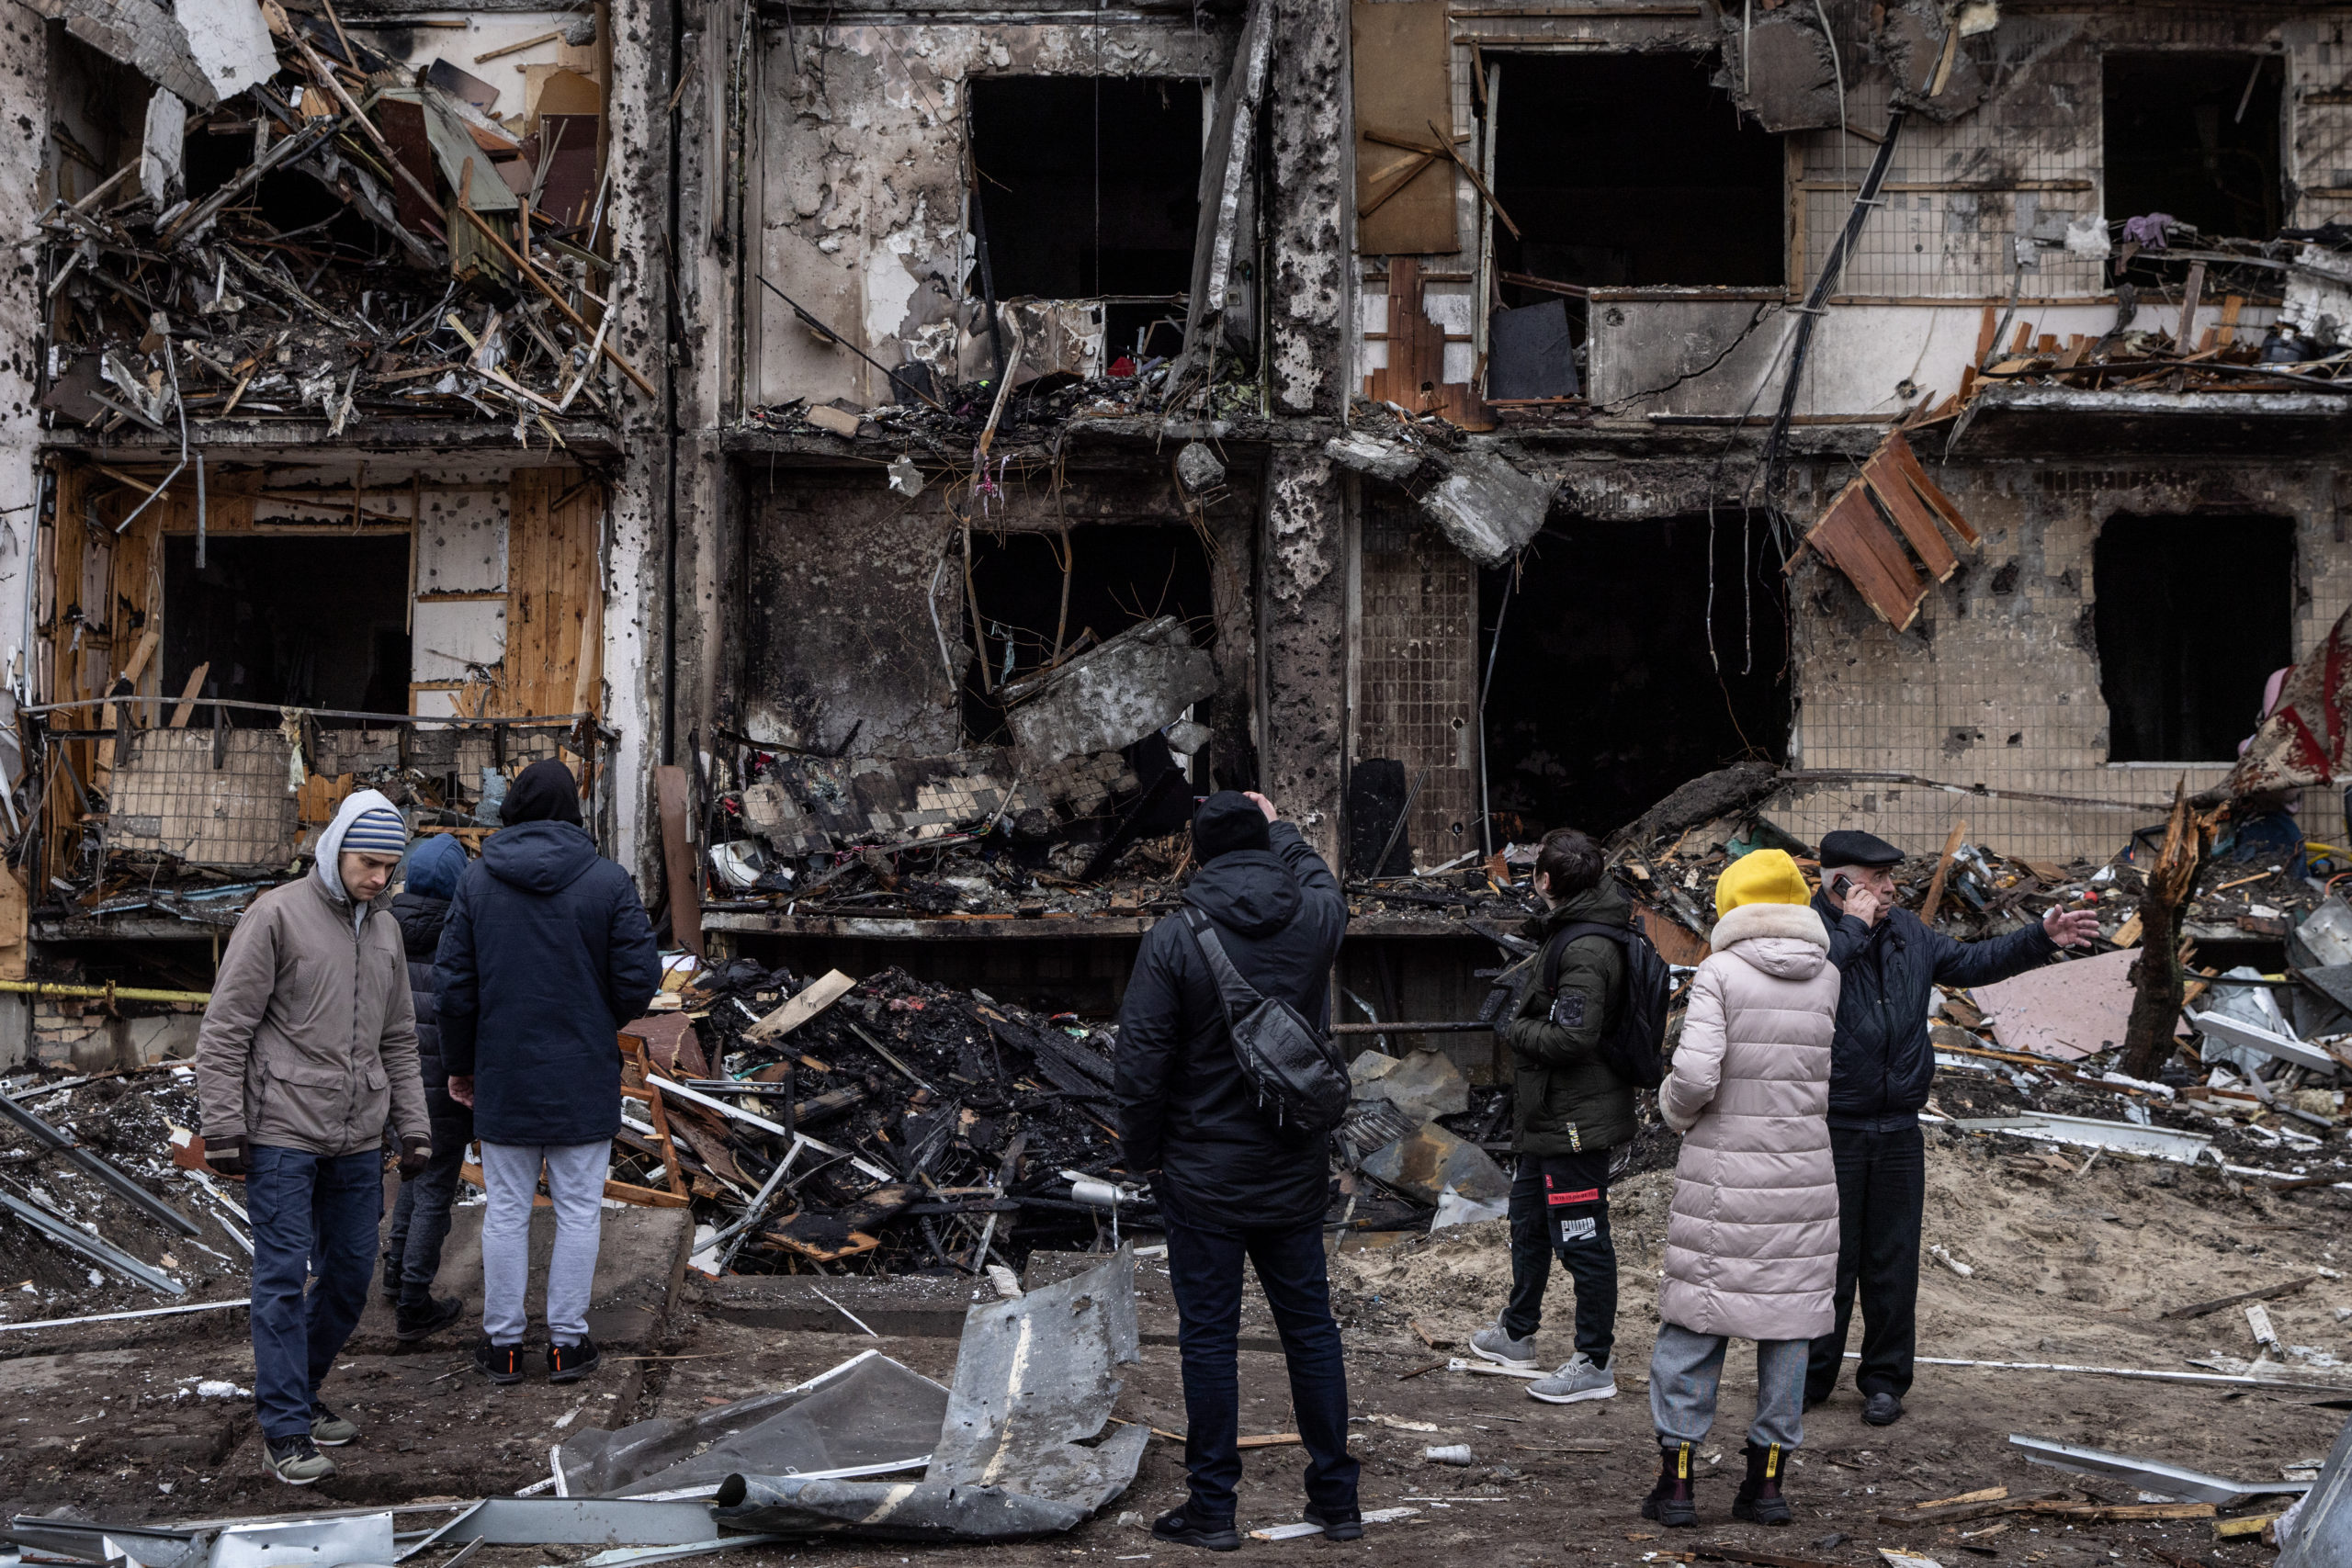 People look at the exterior of a damaged residential block hit by an early morning missile strike on Feb. 25 in Kyiv, Ukraine. (Chris McGrath/Getty Images)